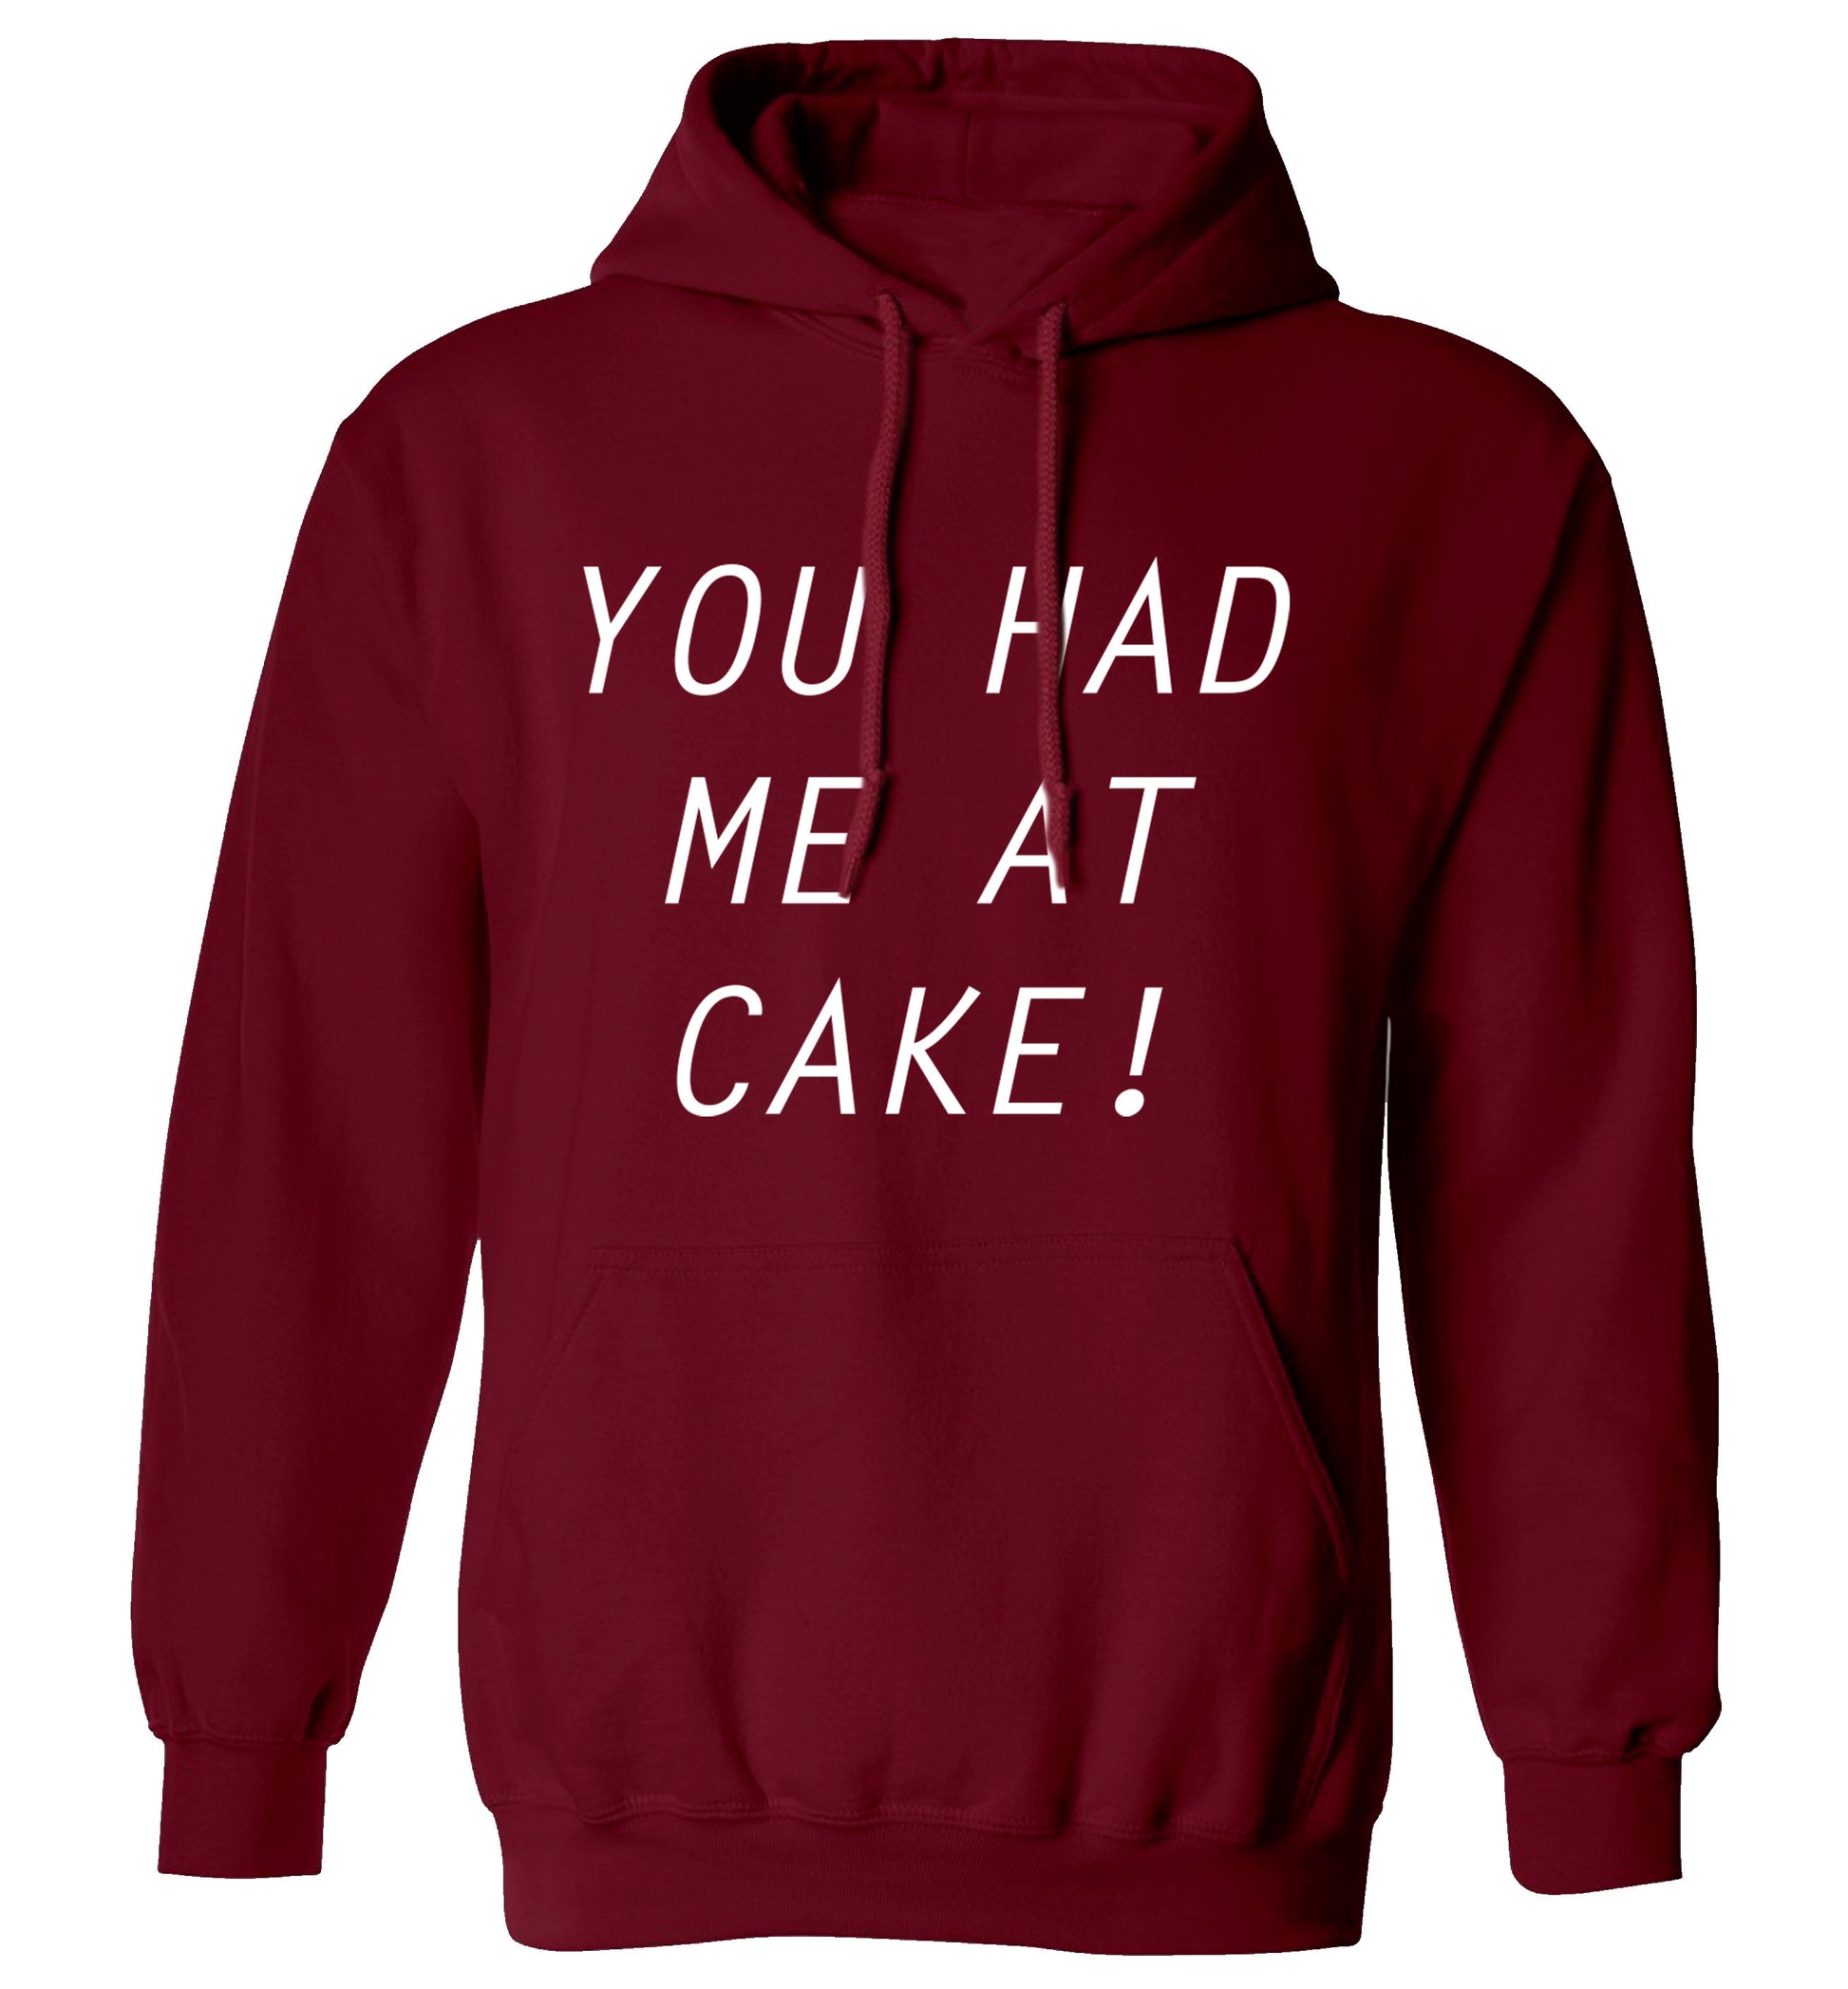 You had me at cake adults unisex maroon hoodie 2XL